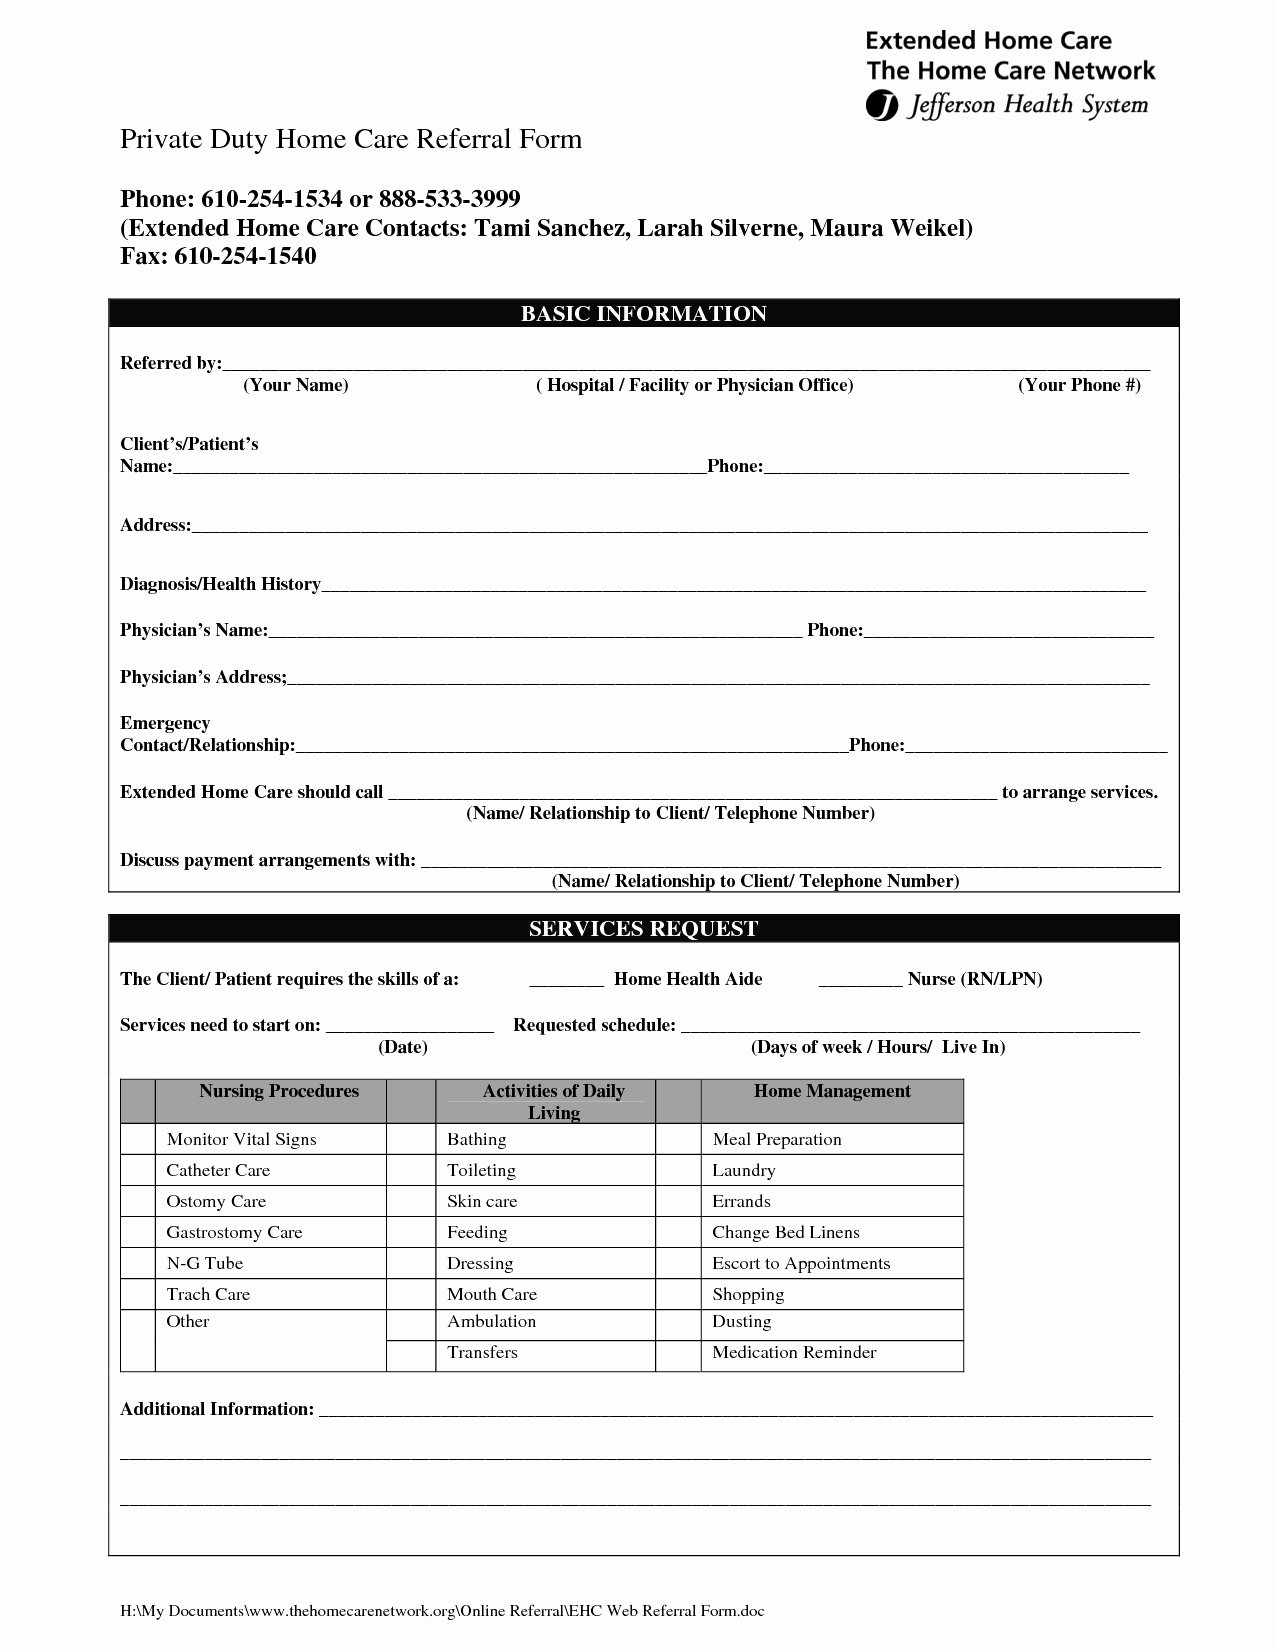 Medical Referral form Template Inspirational Medical Referral form Template – Versatolelive